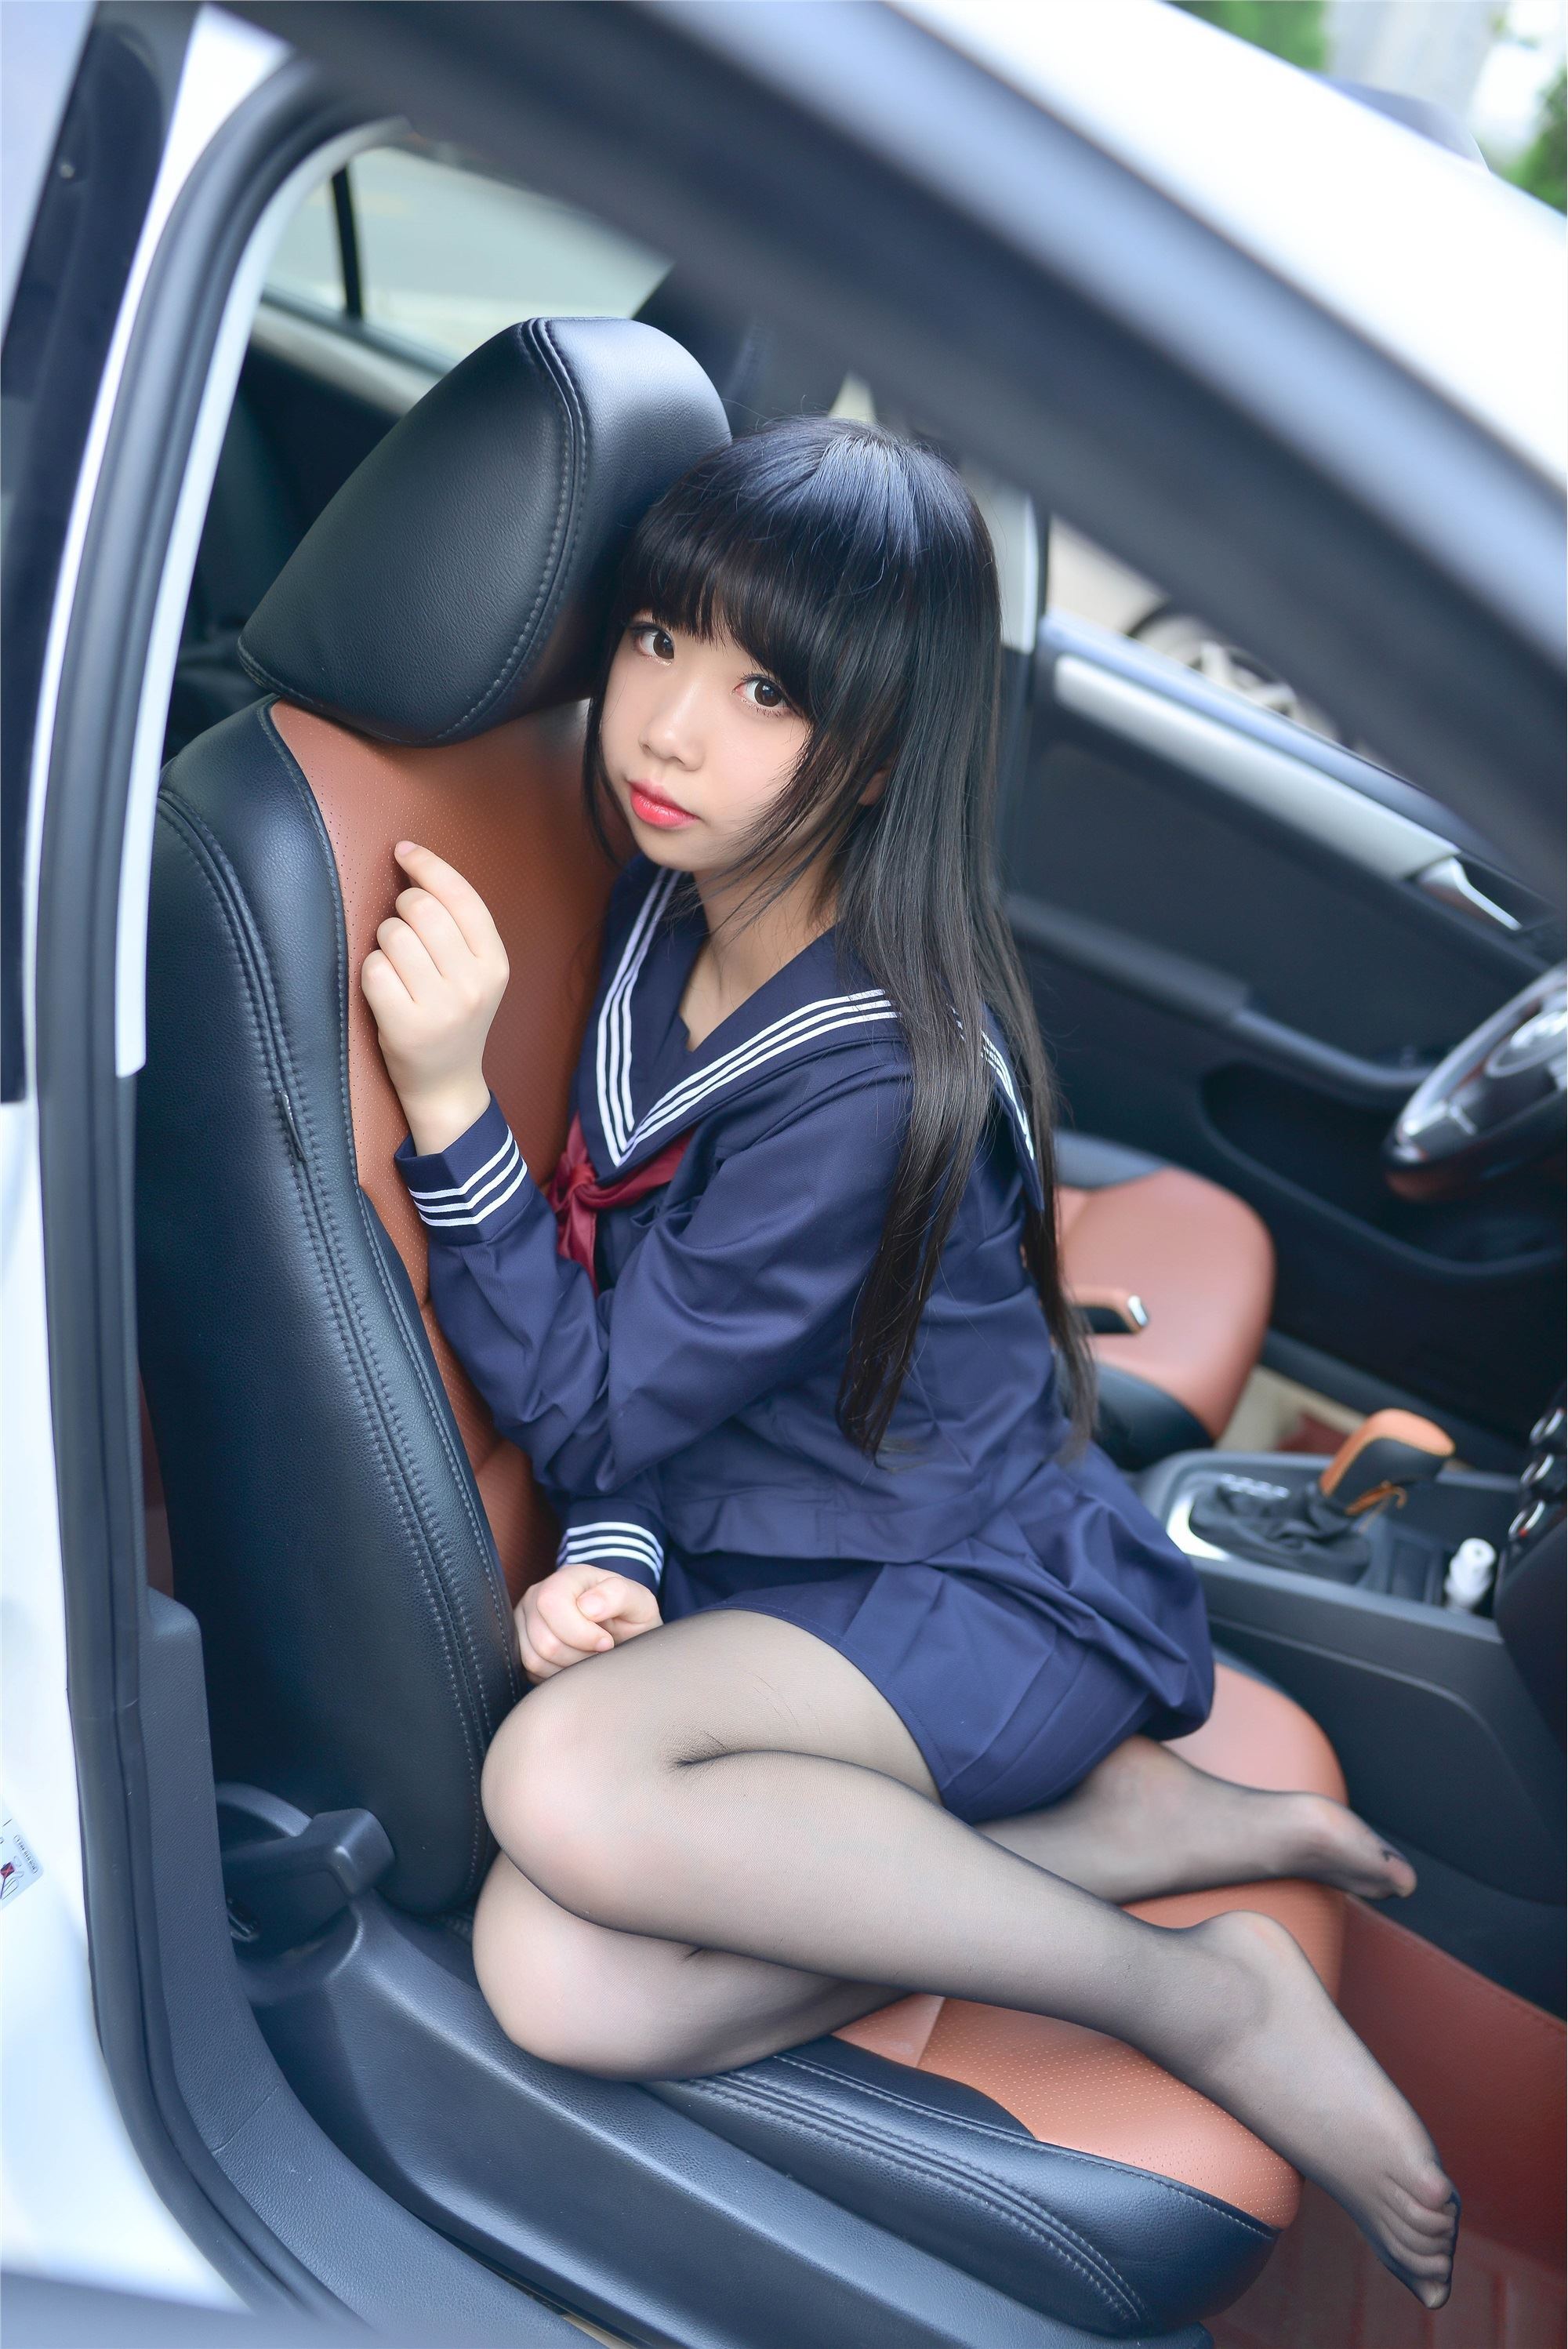 Miss cos Xueqi - JK in the car